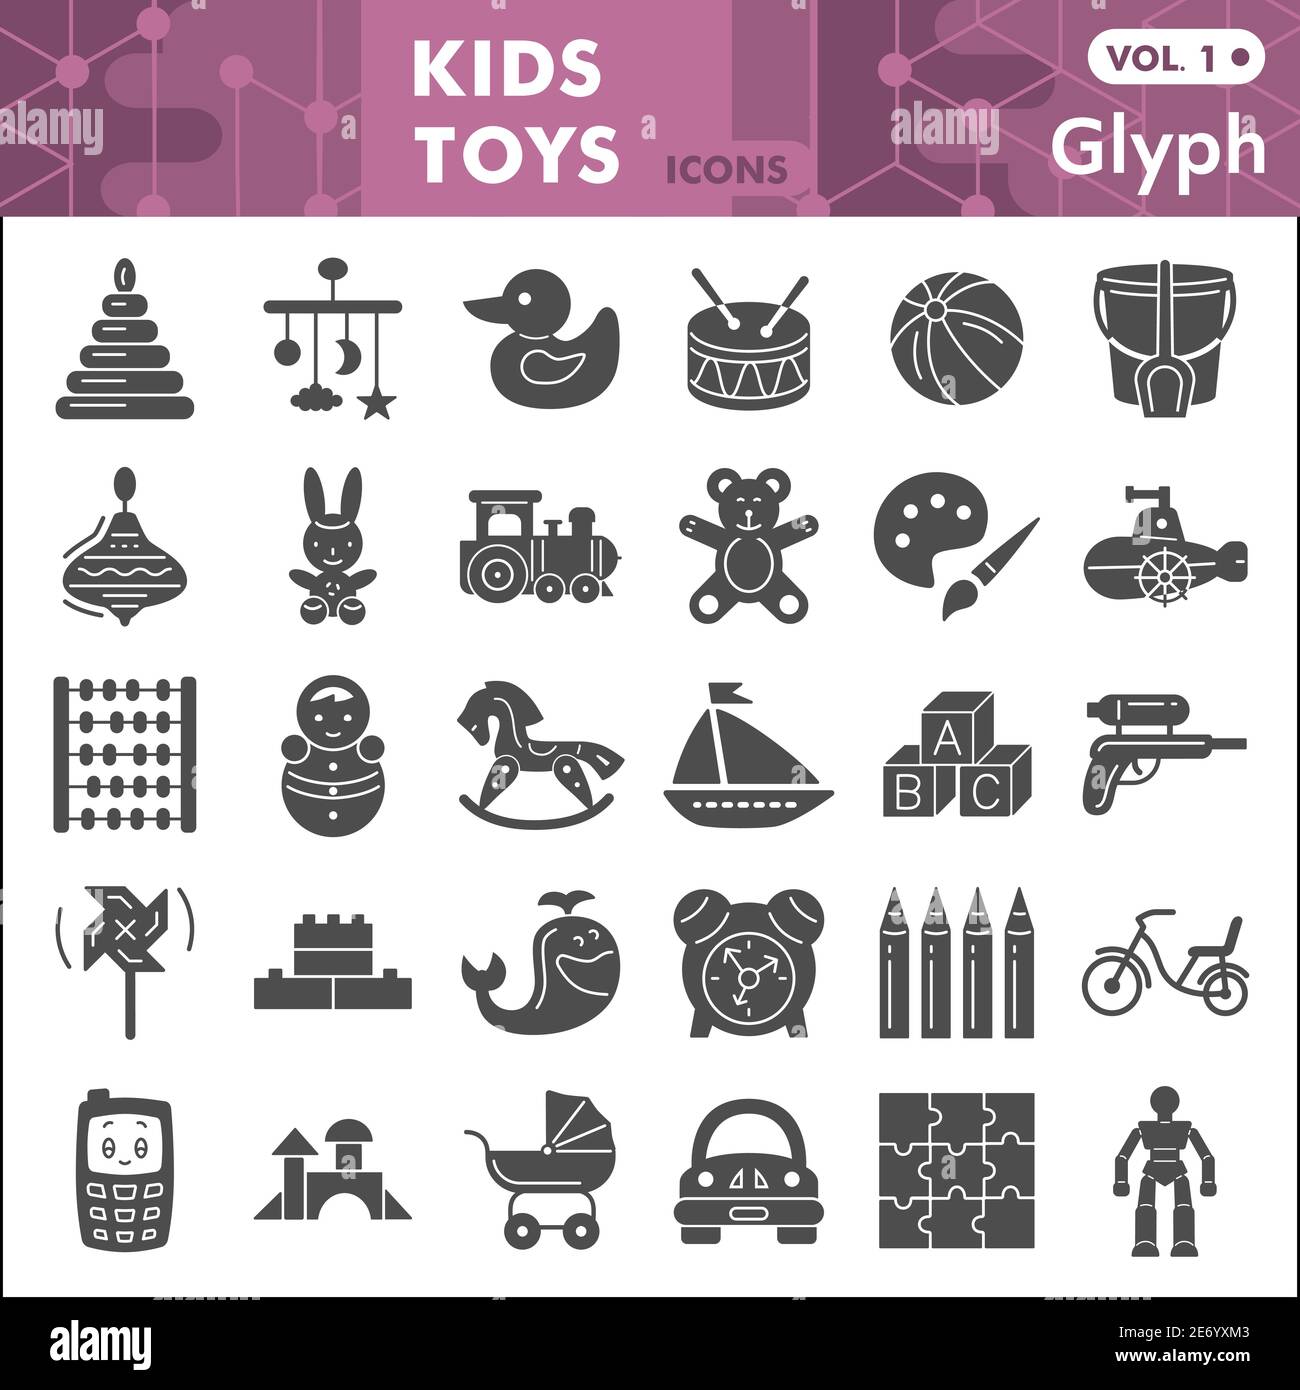 Kids toys solid icon set, Children toys symbols collection or sketches. Baby toy glyph style signs for web and app. Vector graphics isolated on white Stock Vector